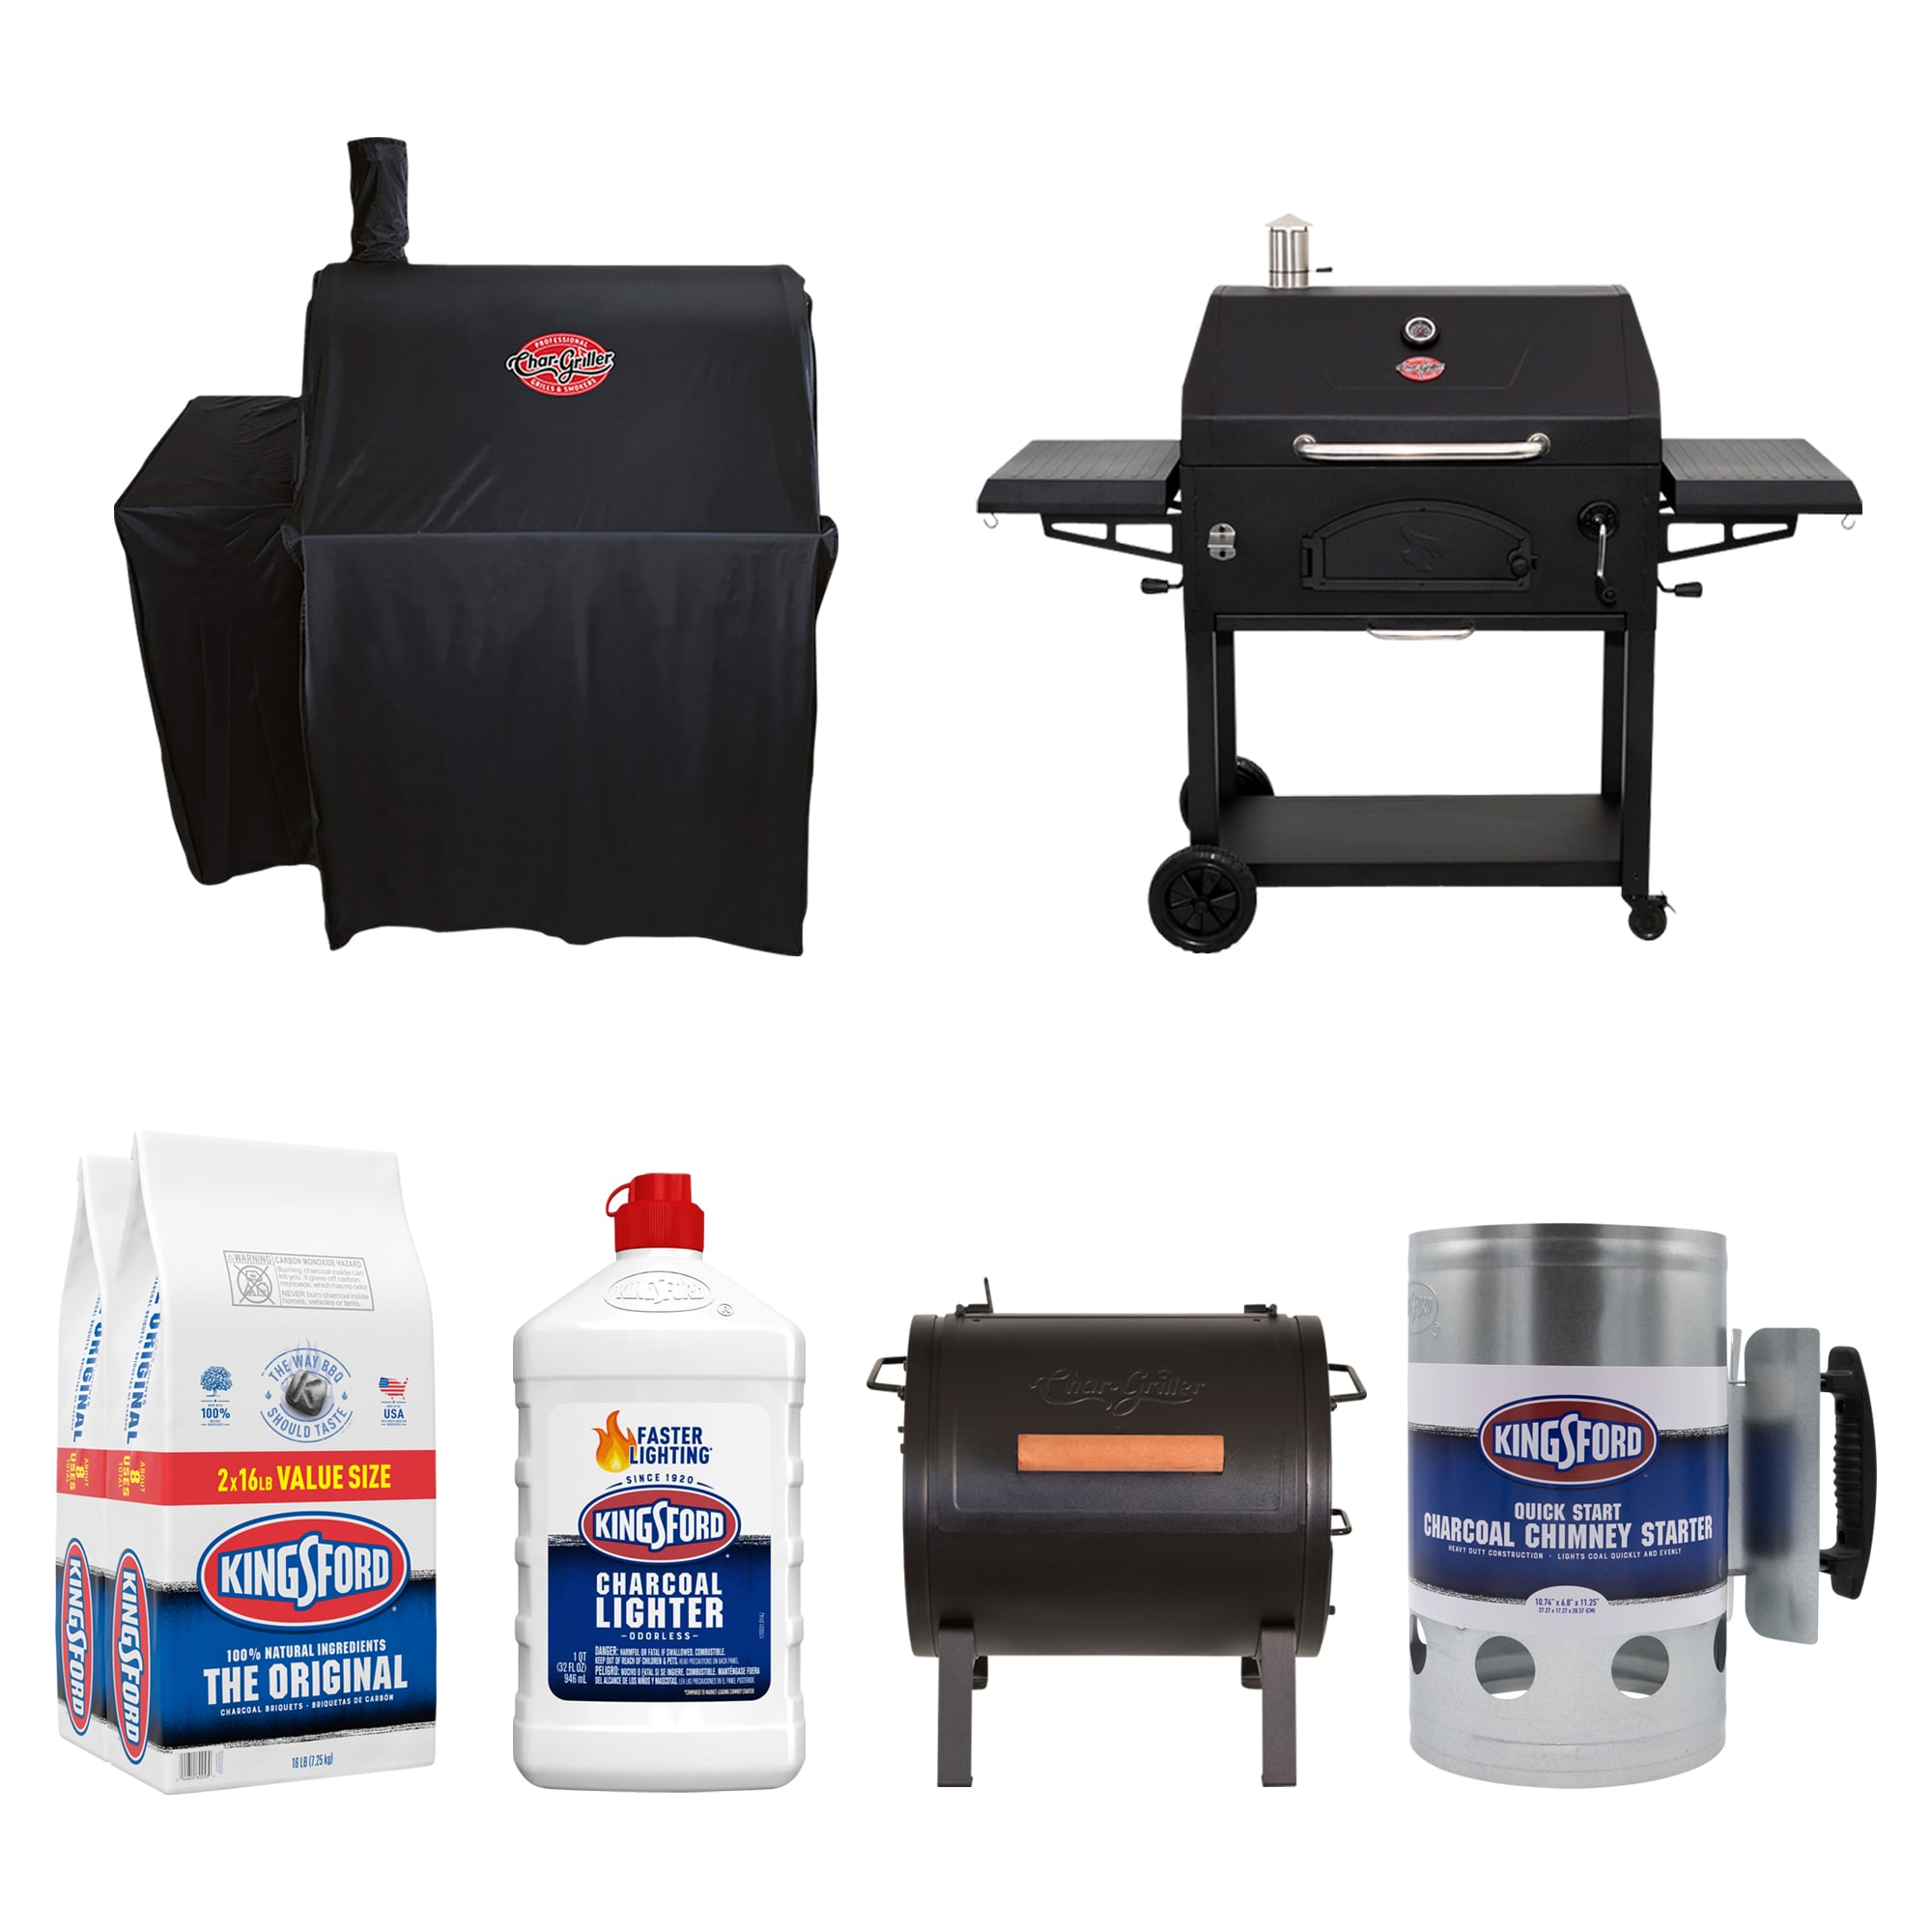 Char-Griller Deluxe Charcoal Grill and Smoker - Shop Grills